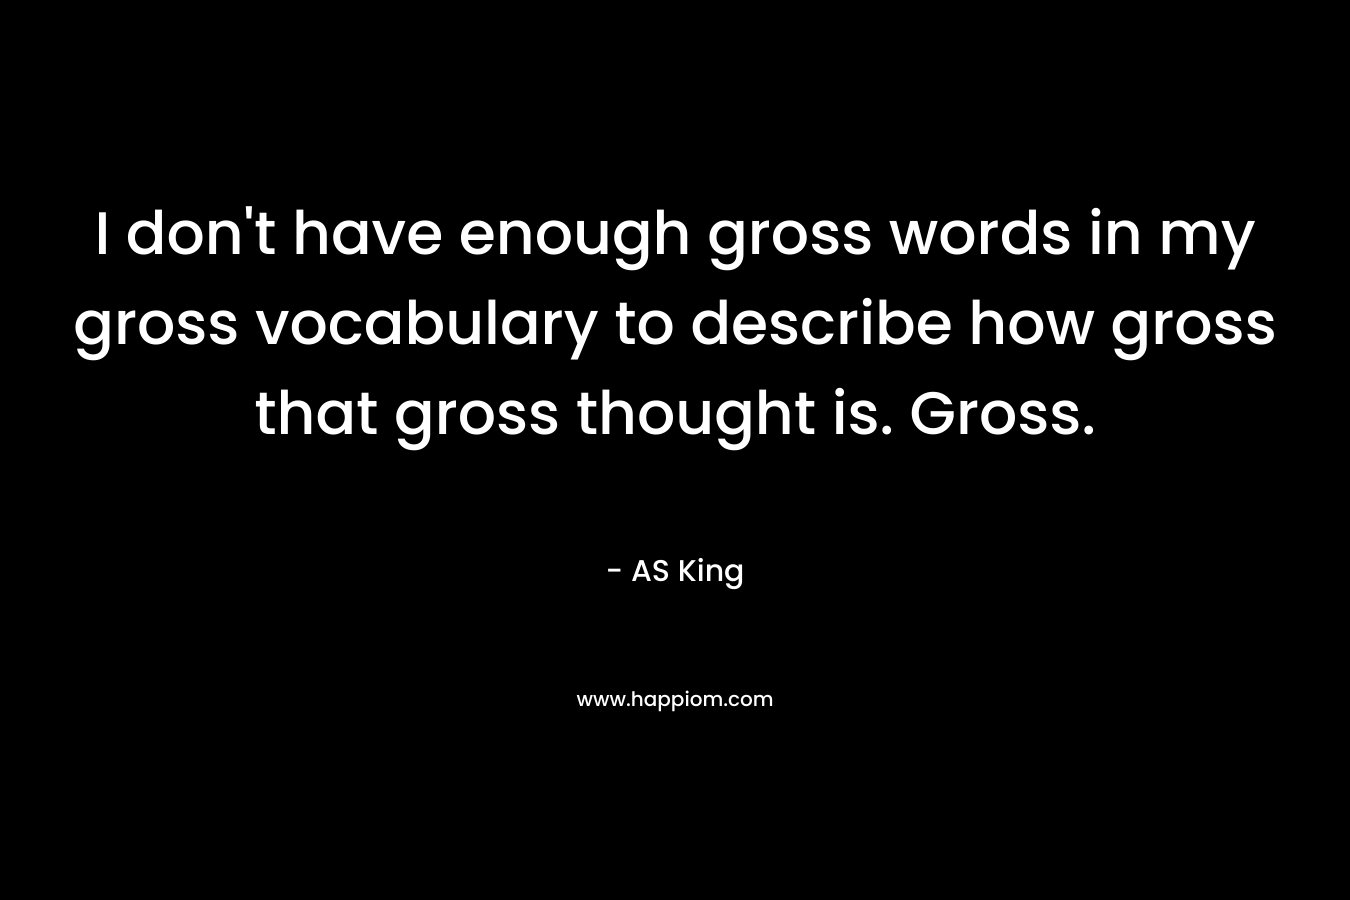 I don’t have enough gross words in my gross vocabulary to describe how gross that gross thought is. Gross. – AS King